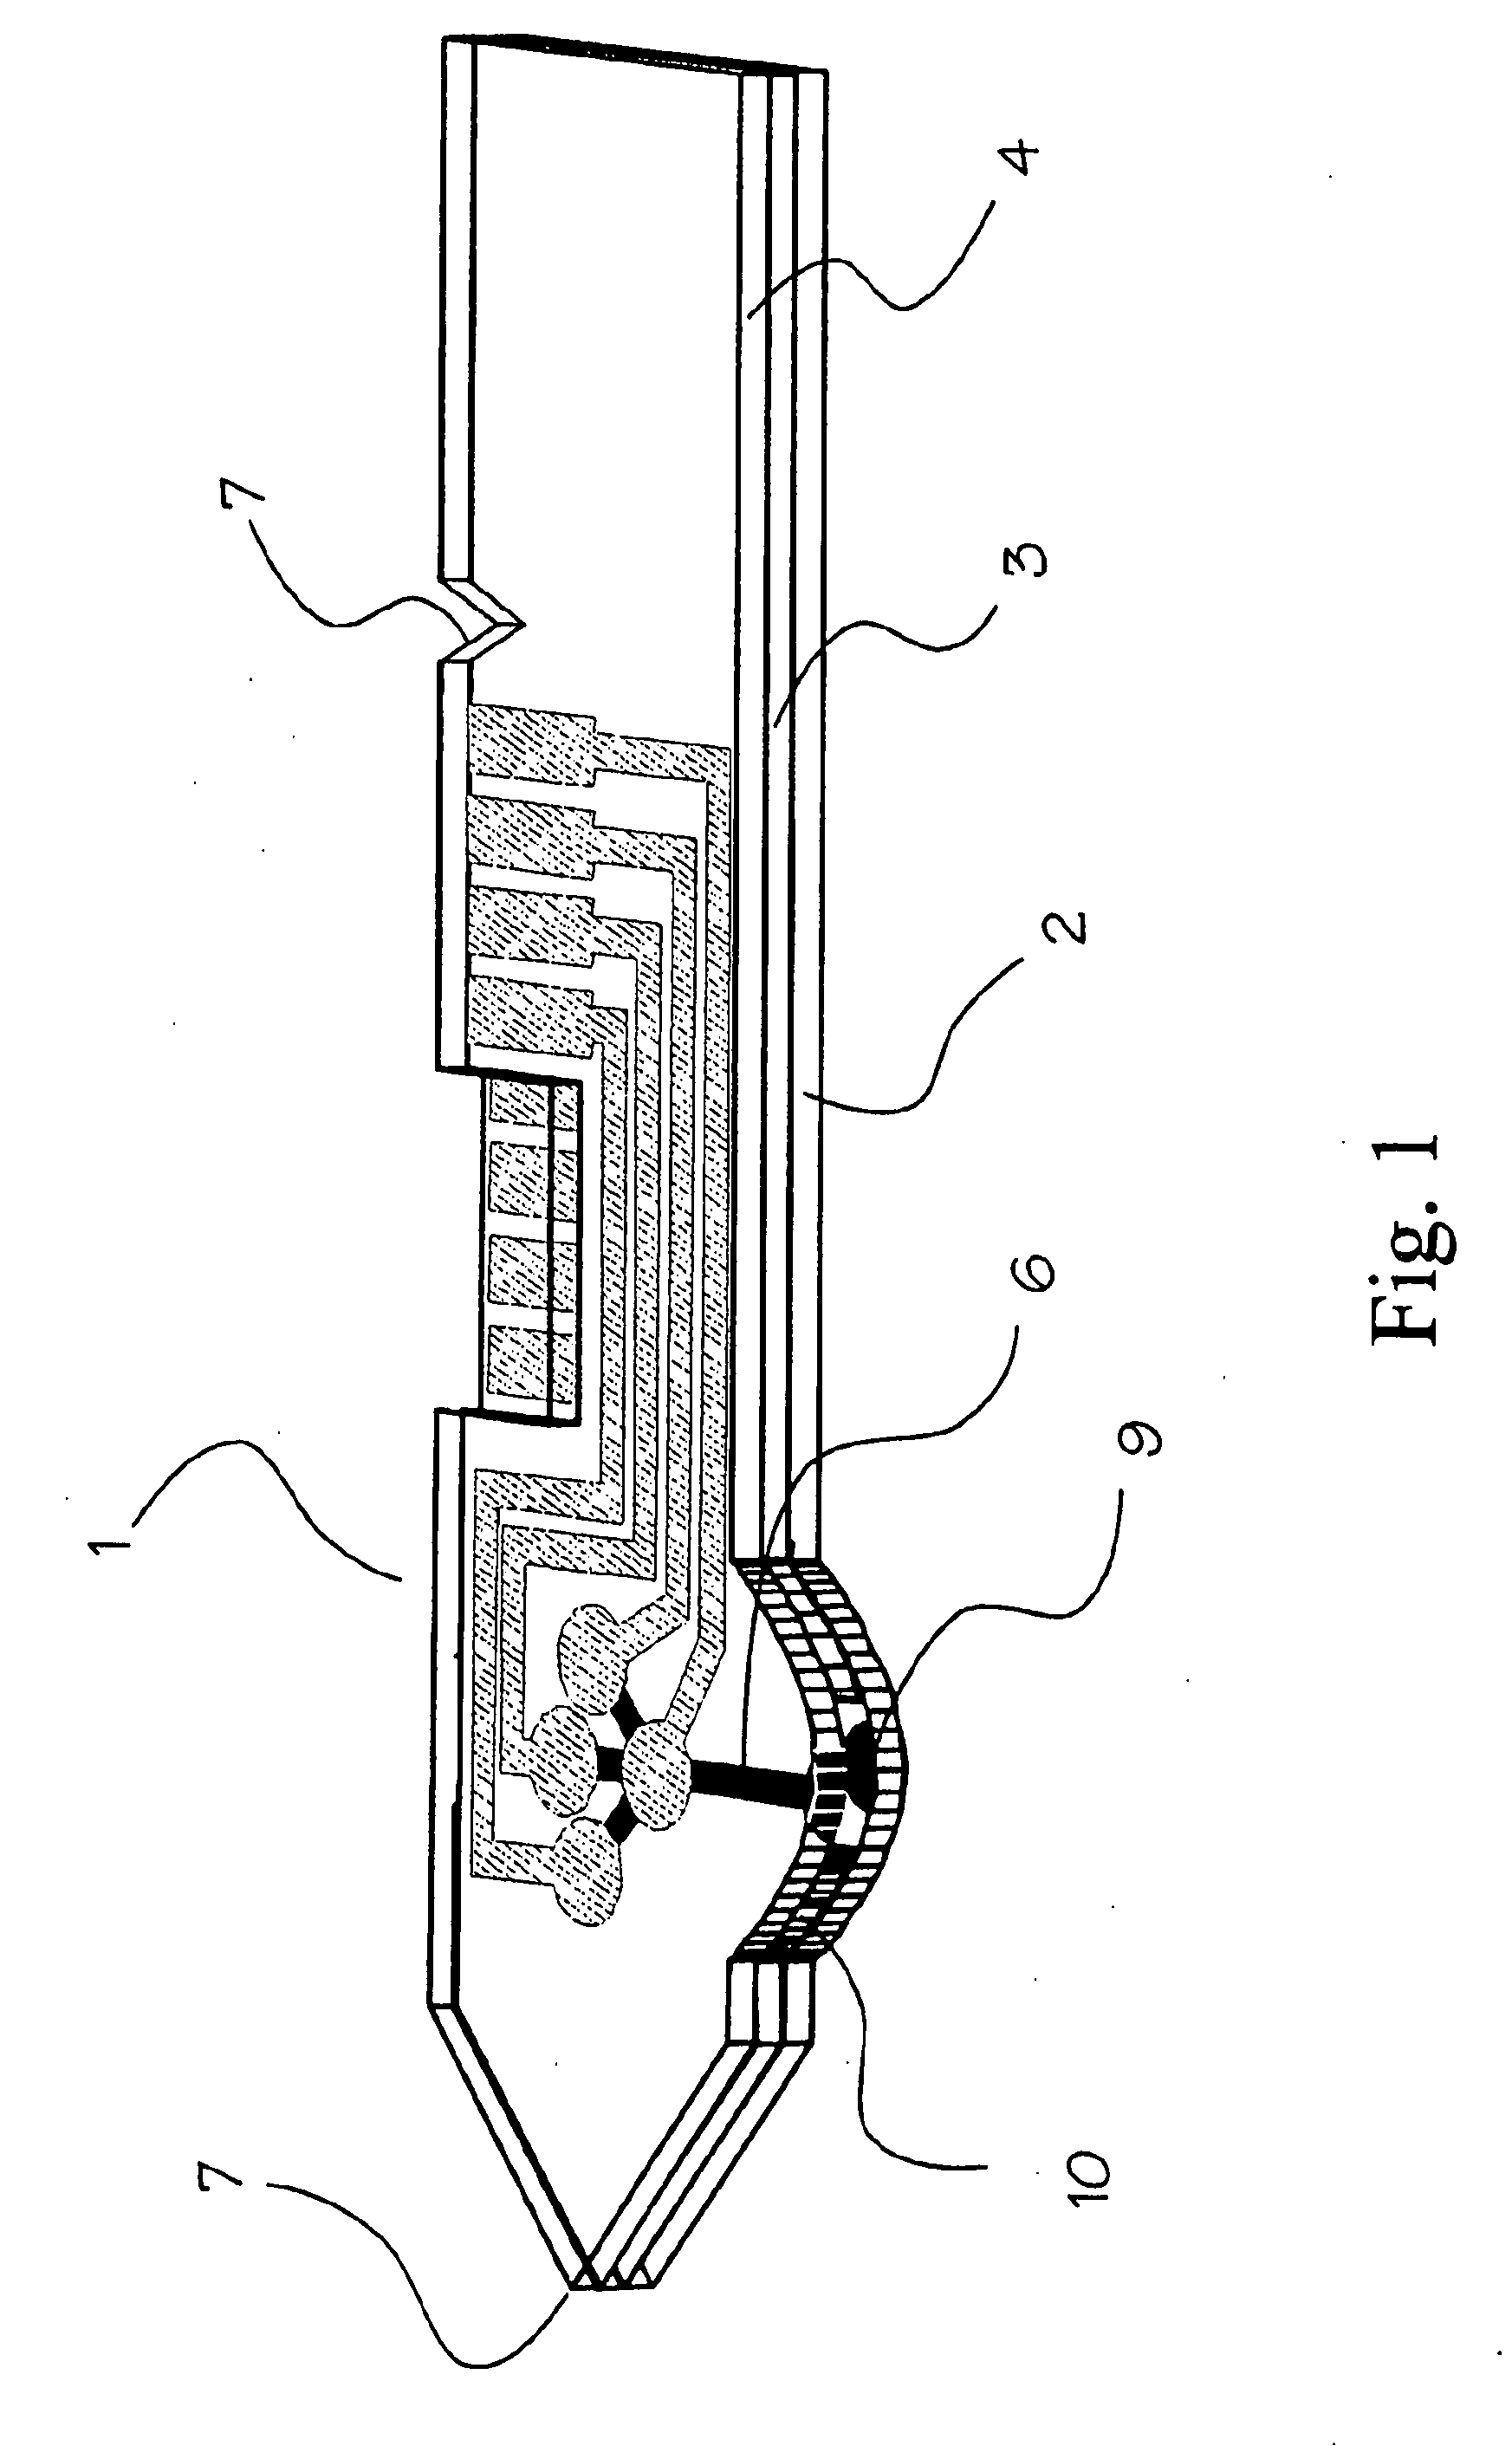 Analyte Test System for Determining the Concentration of an Analyte in a Physiological or Aqueous Fluid